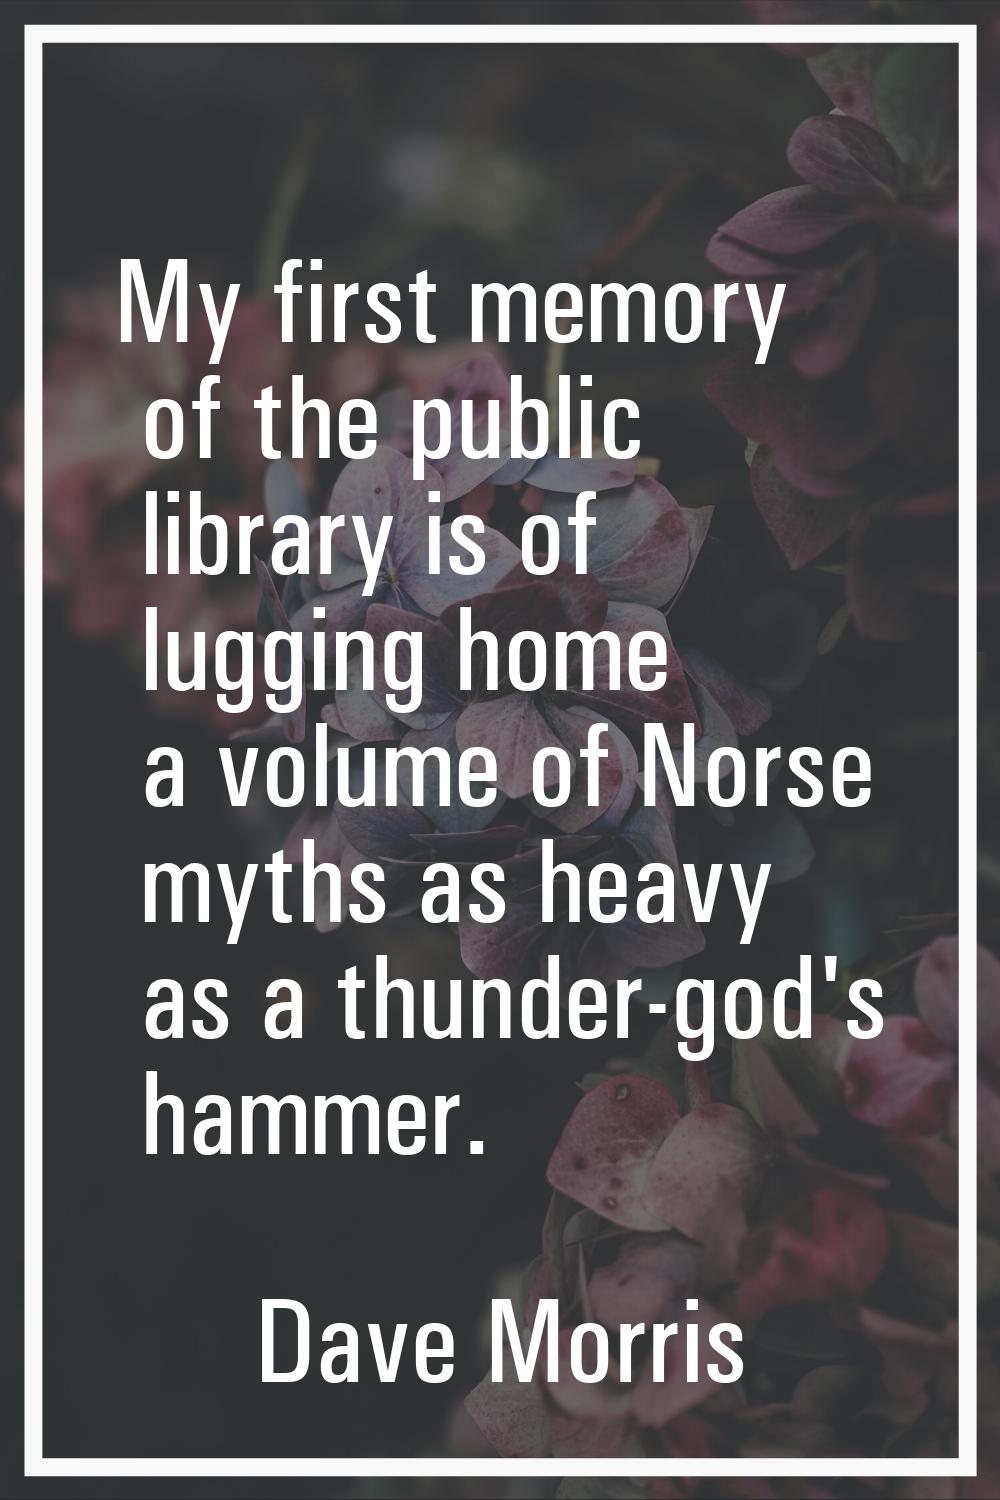 My first memory of the public library is of lugging home a volume of Norse myths as heavy as a thun